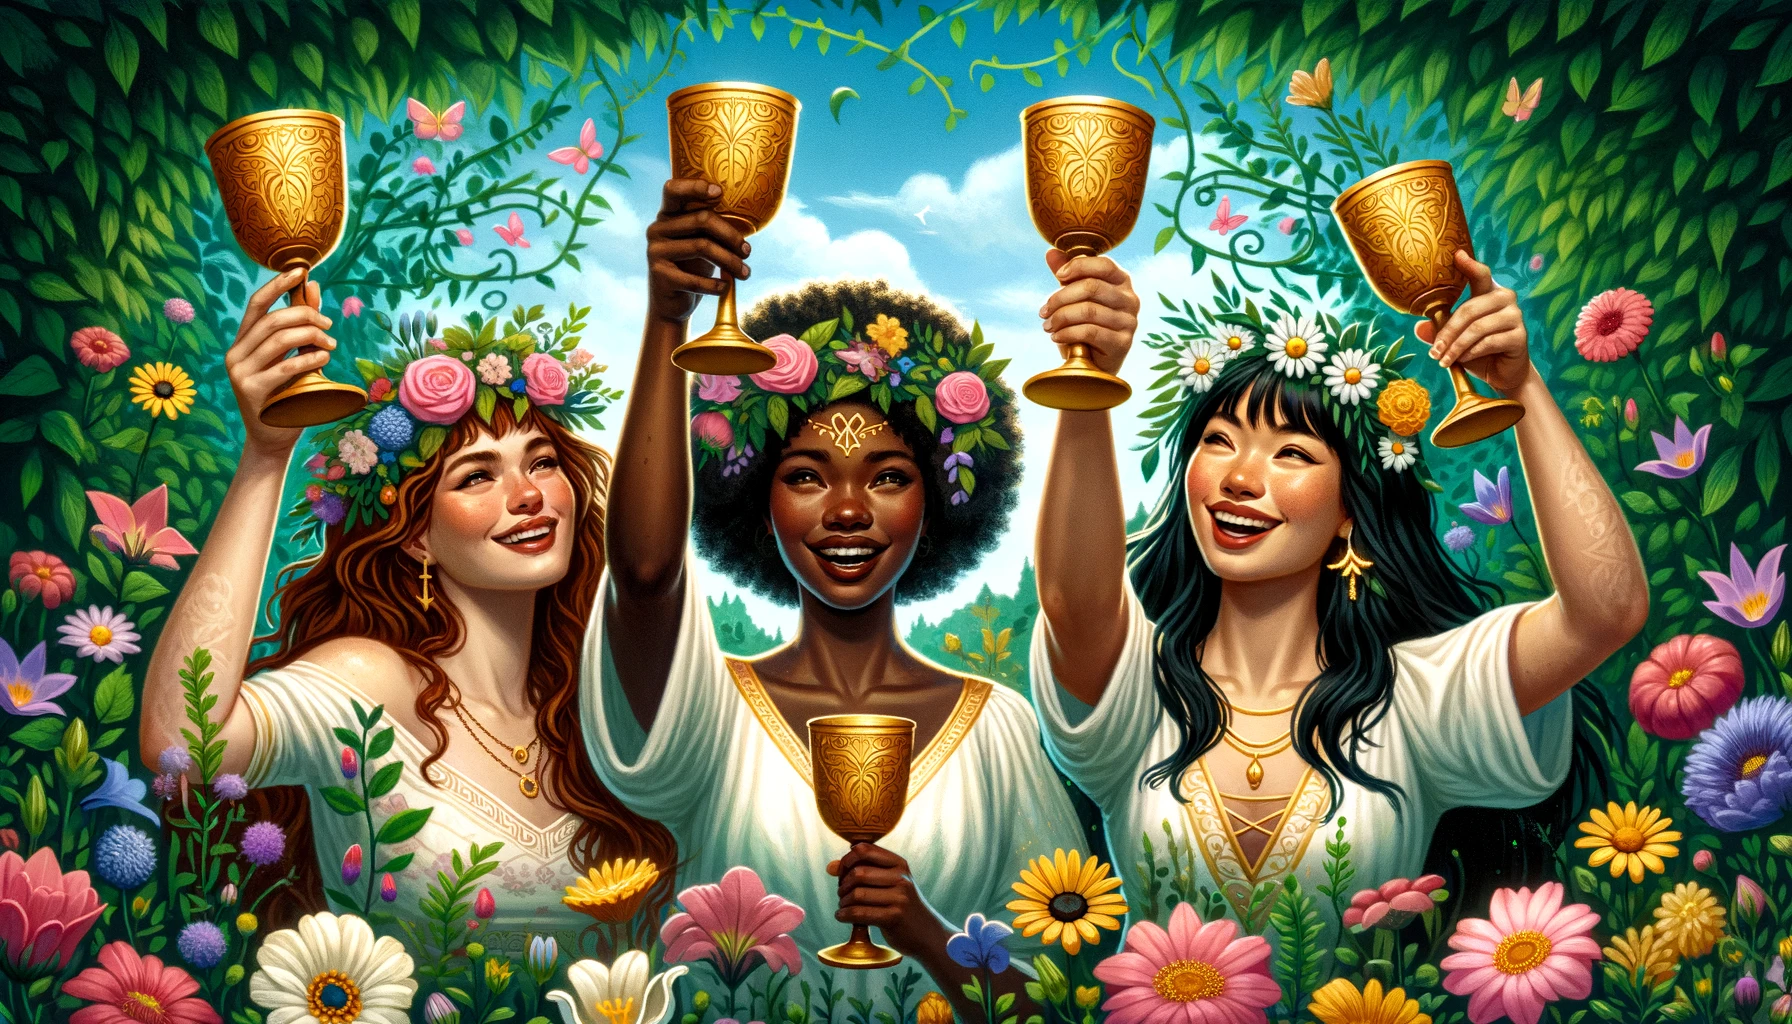 Three women of diverse ethnicities joyfully raising golden chalices in a lush garden. The first woman of Caucasian descent has long auburn hair and